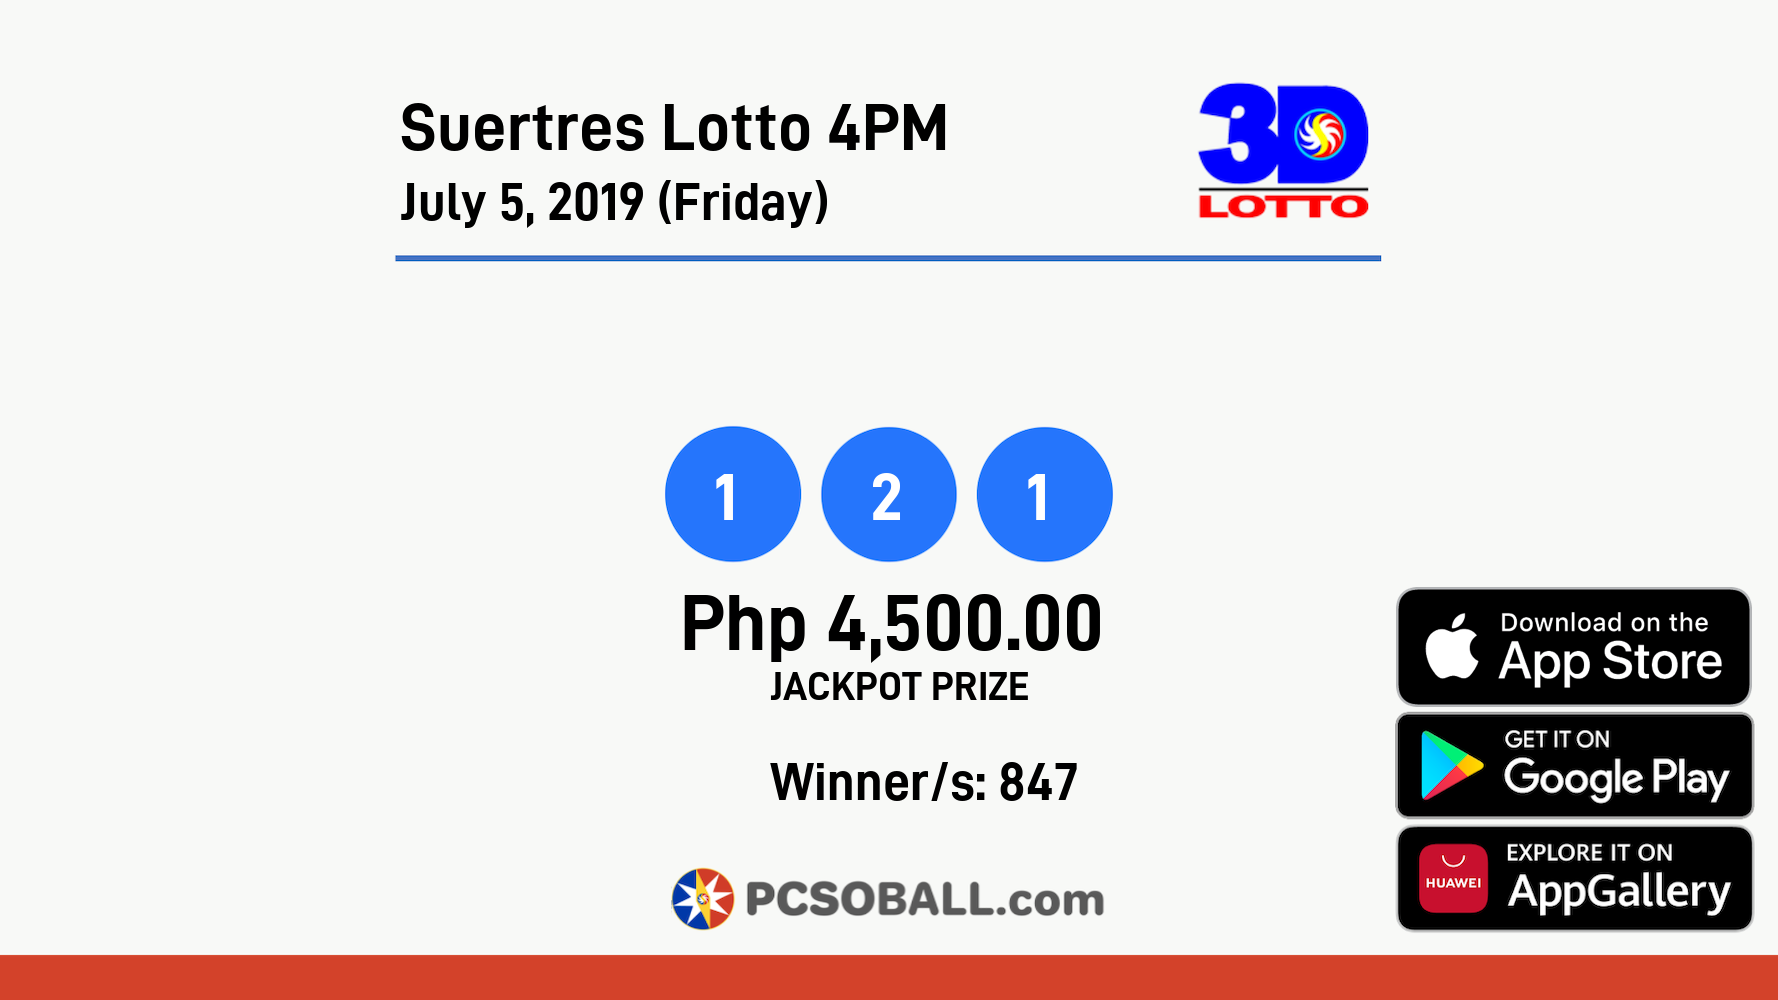 Suertres Lotto 4PM July 5, 2019 (Friday) Result